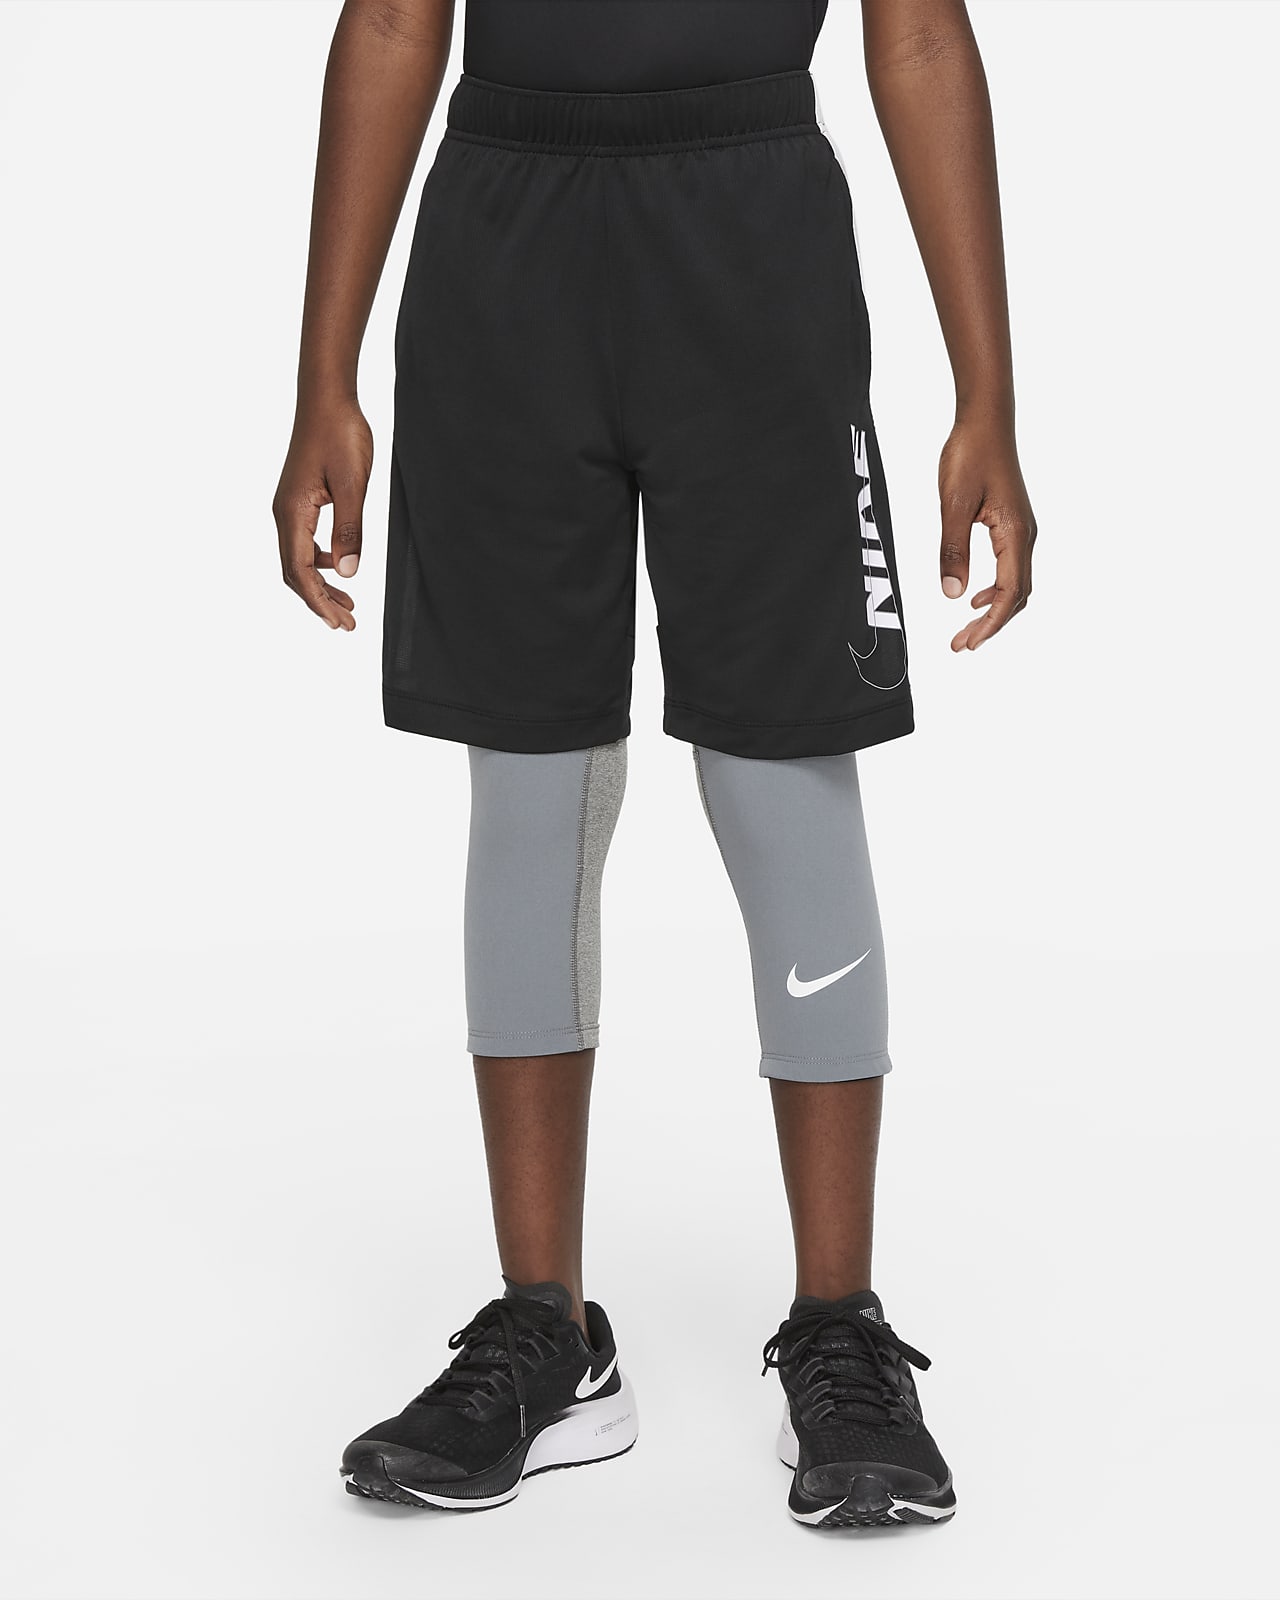 NEW!! Nike Boy's Black w/ White Swoosh Pro Training Tights Variety in Size  #174